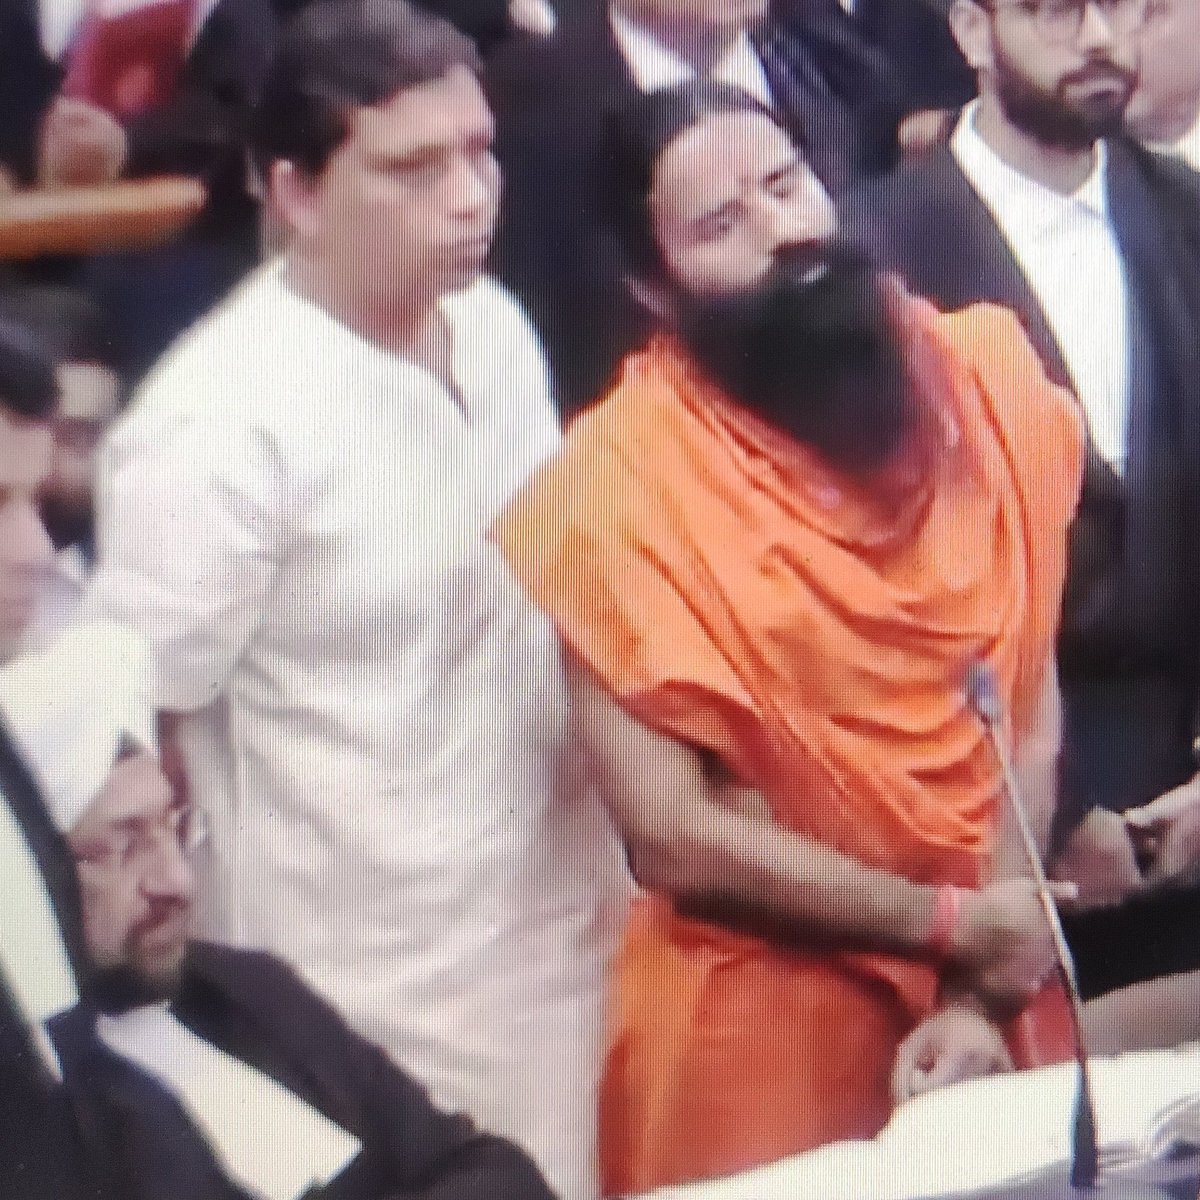 #SupremeCourt refuses to accept Patanjali’s apology, says it is a mere “lip service”

“We are not willing to accept this(apology) and this is perfunctory,” Court says.

#Patanjali MD and Baba Ramdev were personally present before the Court.